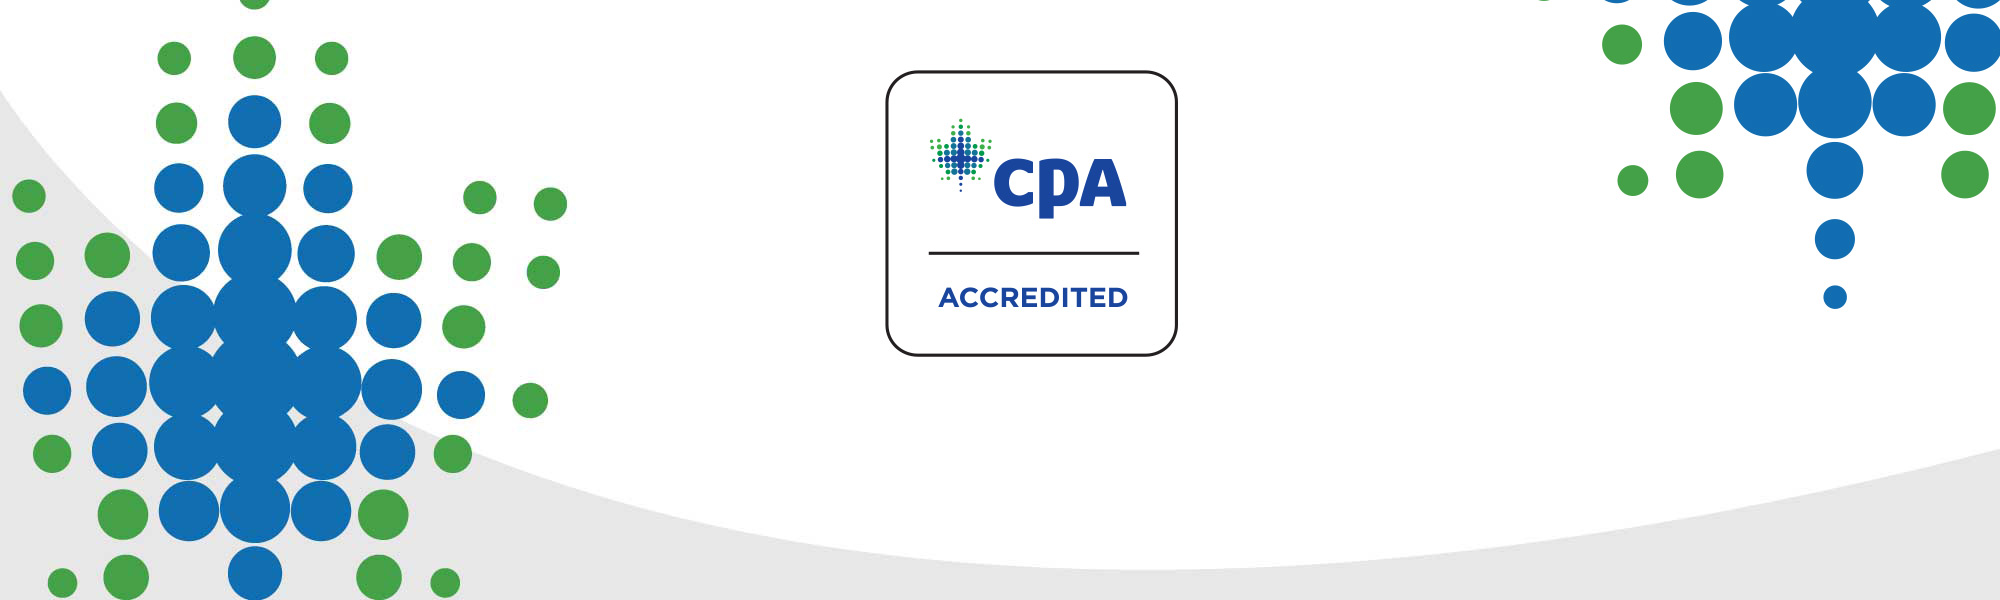 Chartered Professional Accountant (CPA) Accredited